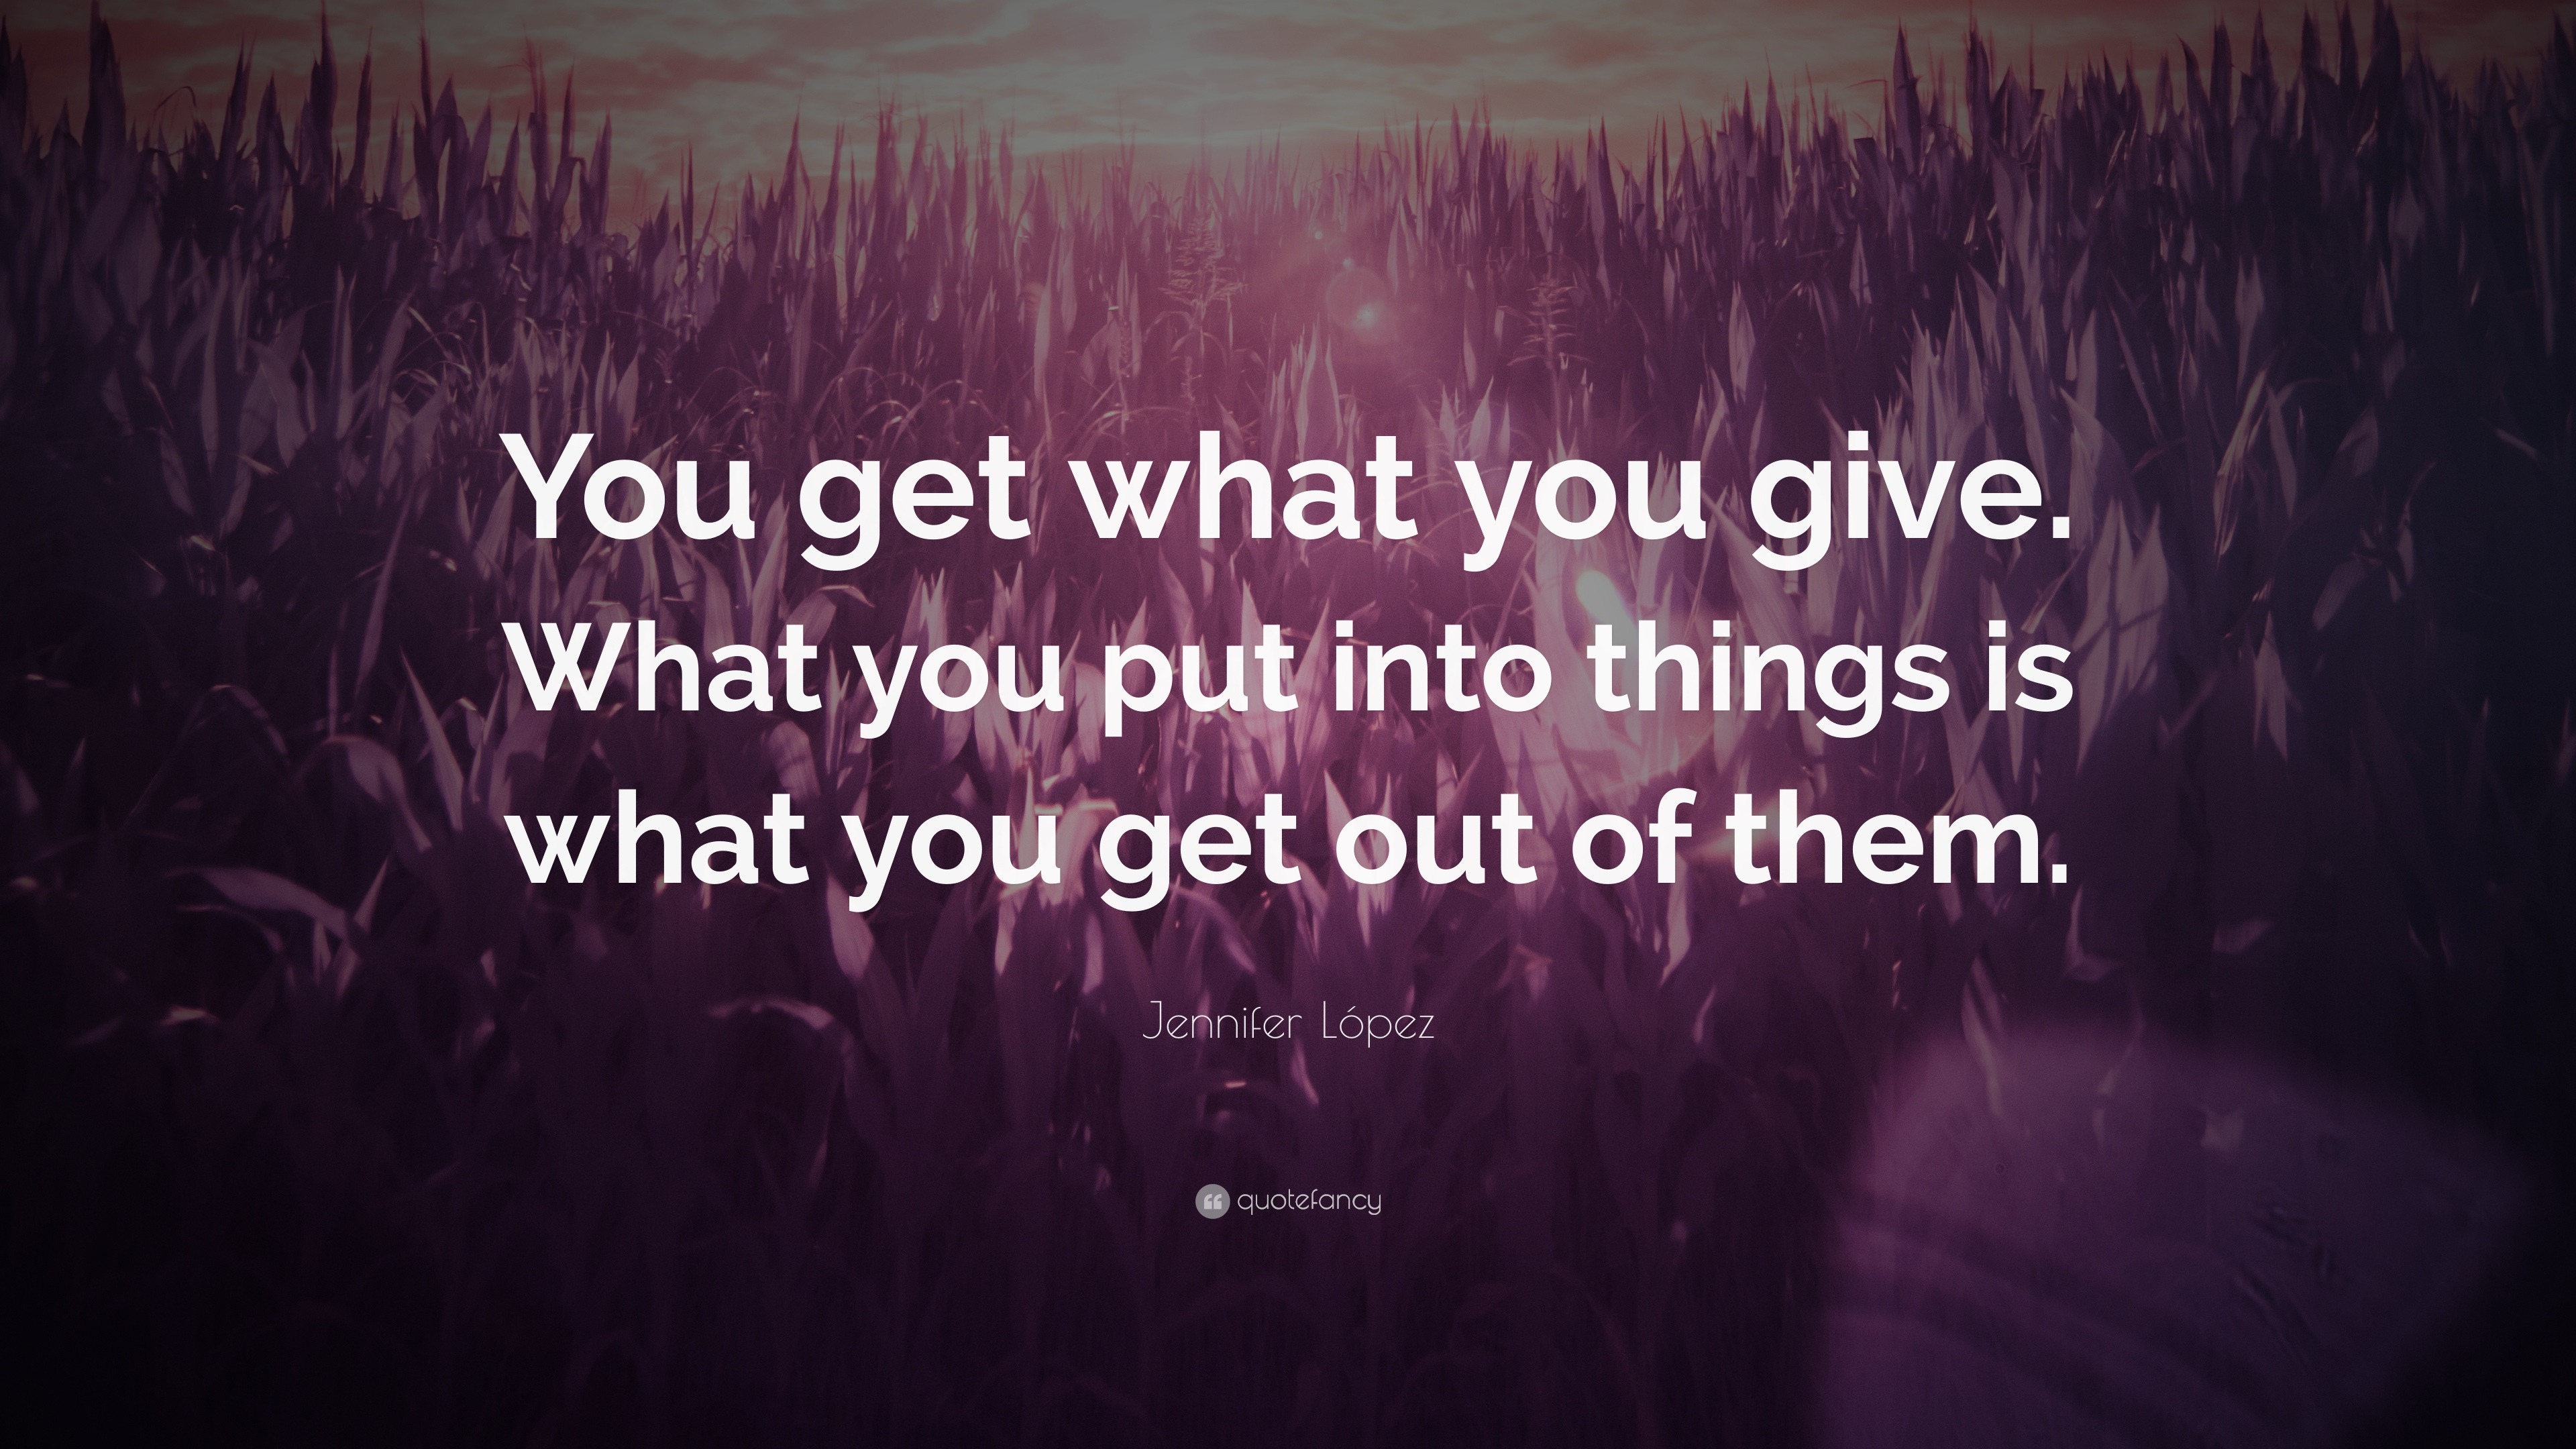 Jennifer Lopez Quote You Get What You Give What You Put Into Things Is What You Get Out Of Them 7 Wallpapers Quotefancy